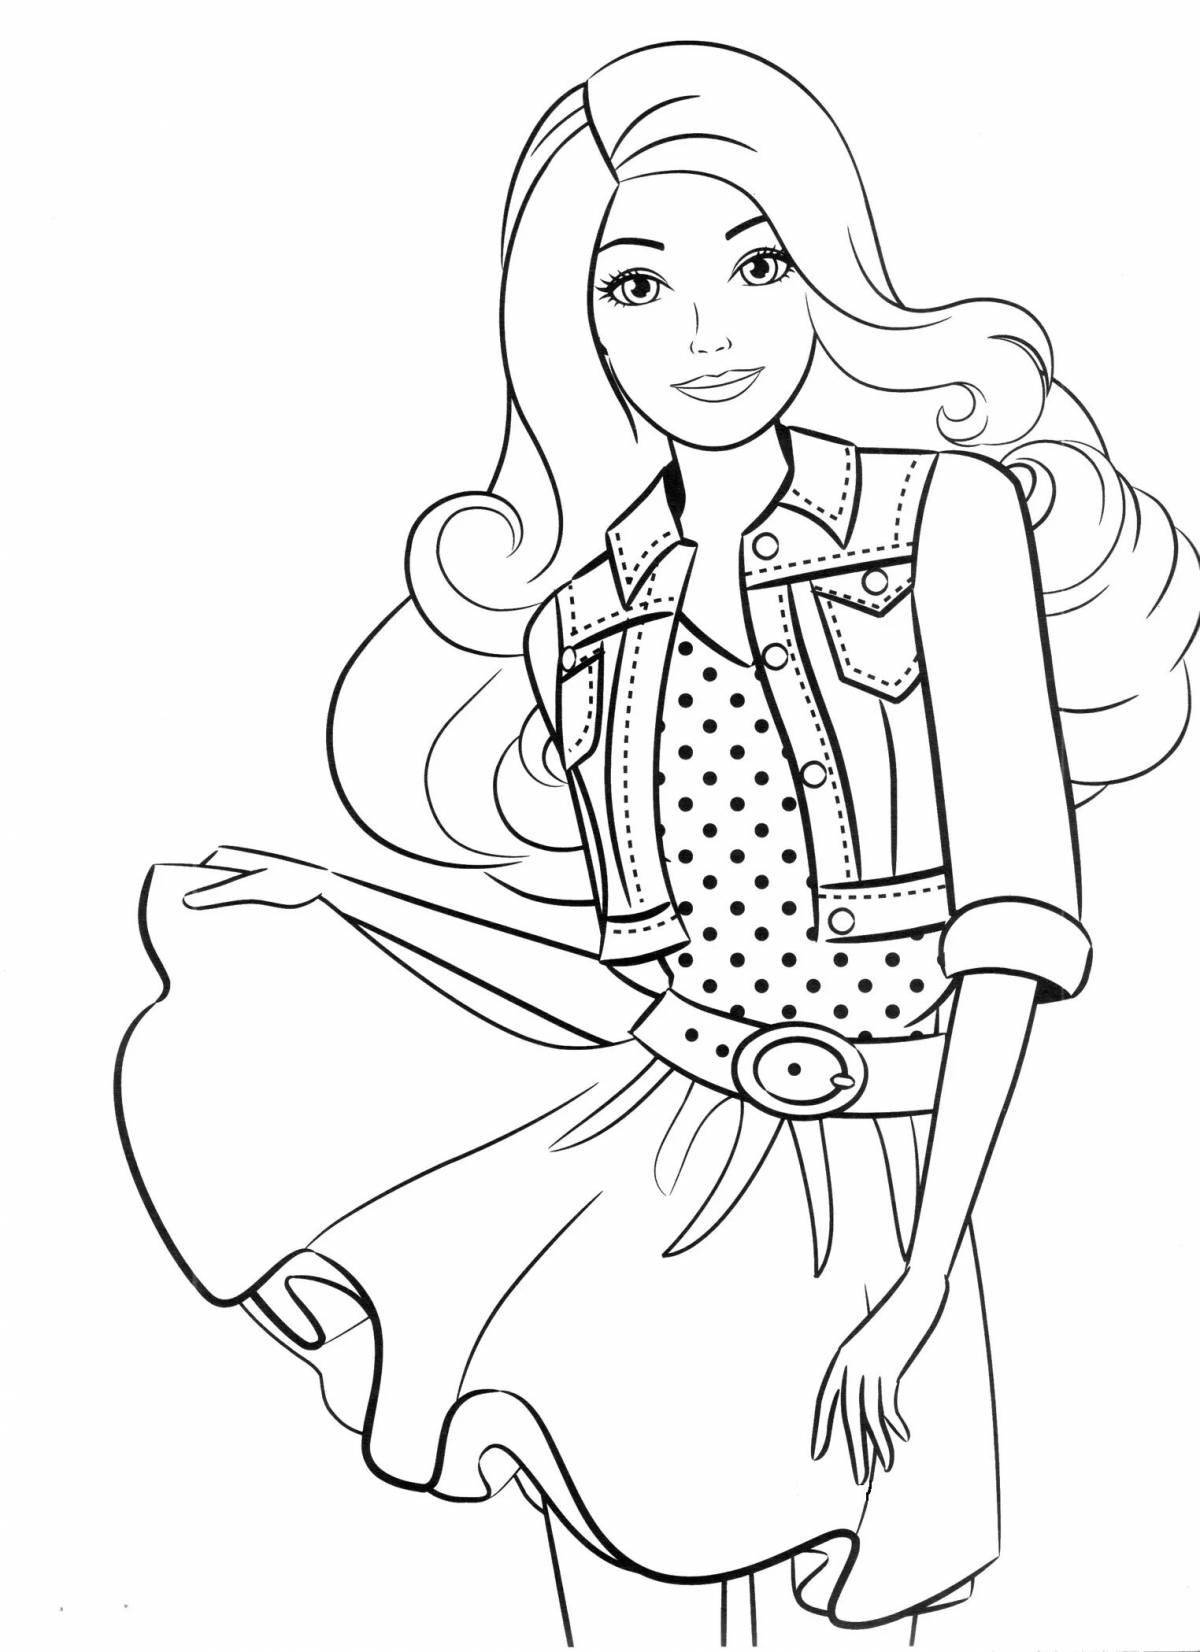 Charming barbie doll coloring book